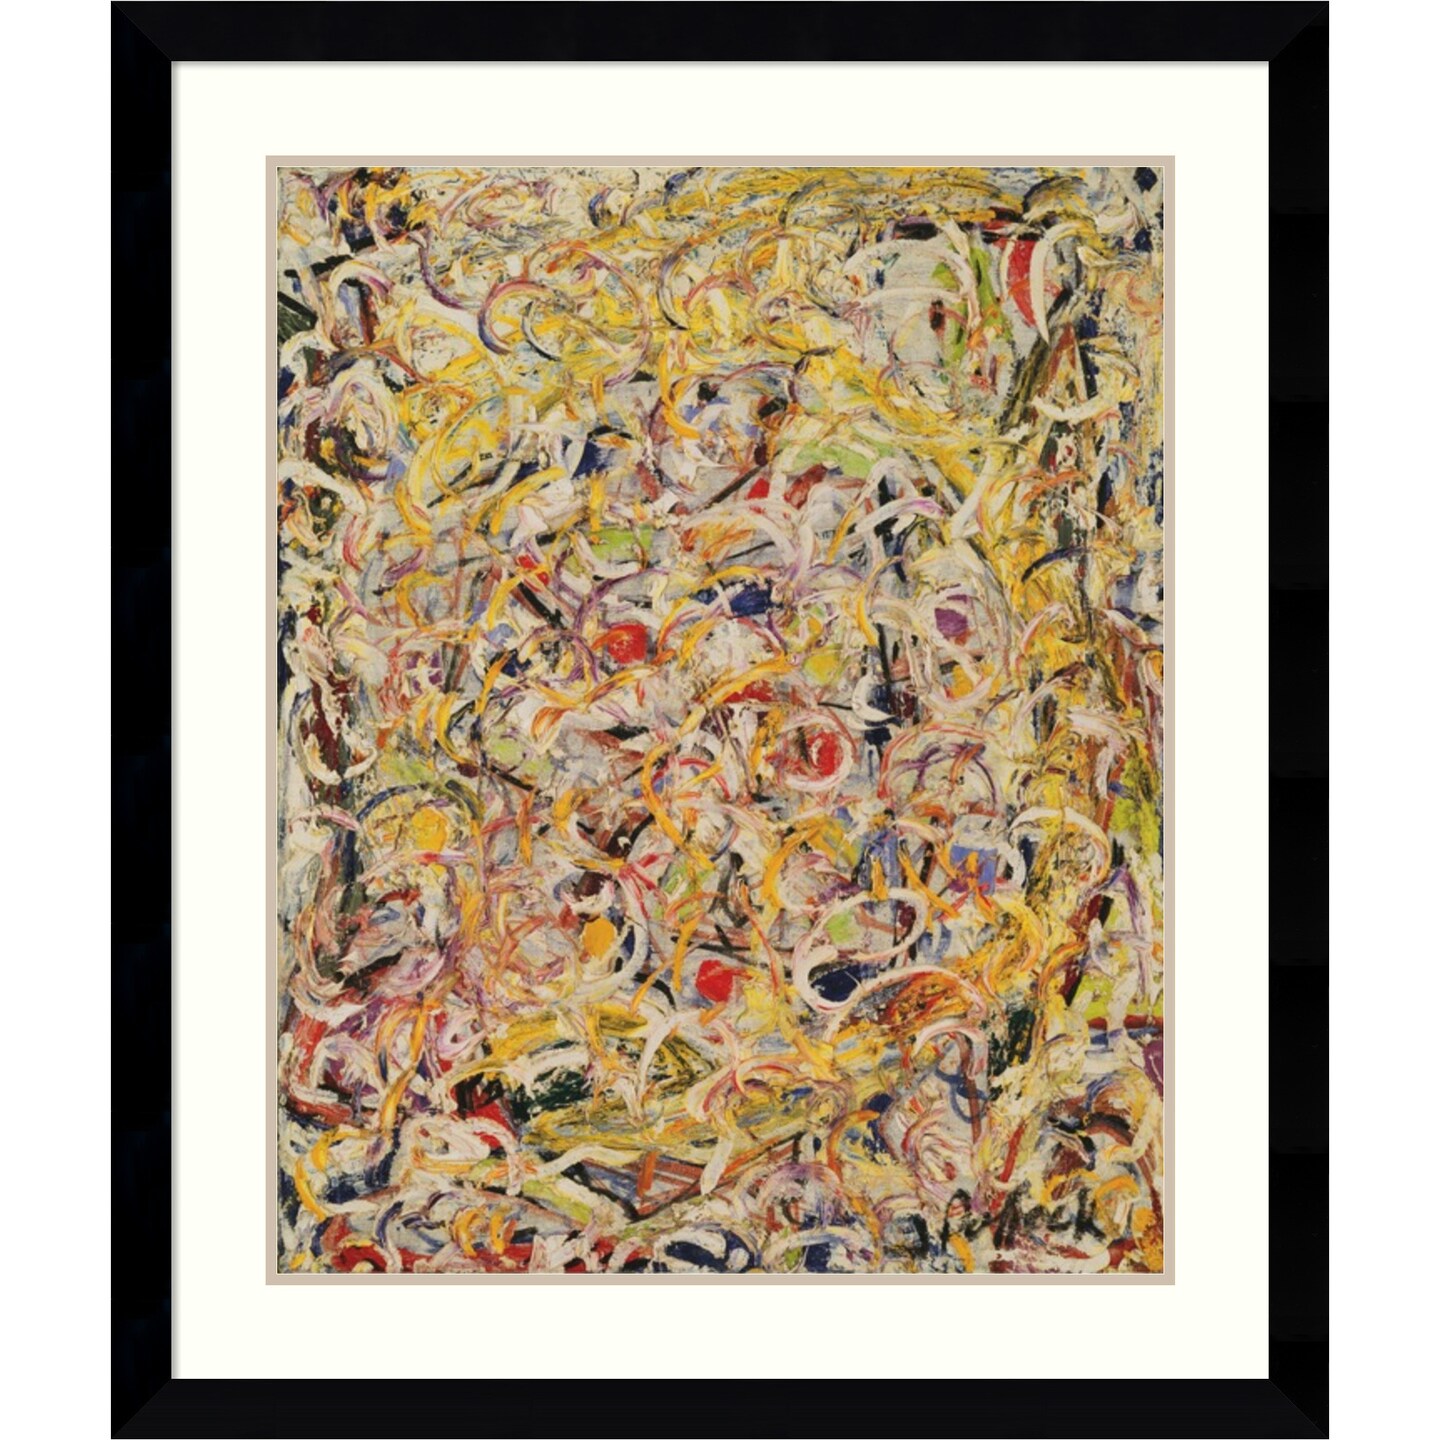 Shimmering Substance 1946 by Jackson Pollock Wood Framed Wall Art Print 33 in. W x 39 in. H